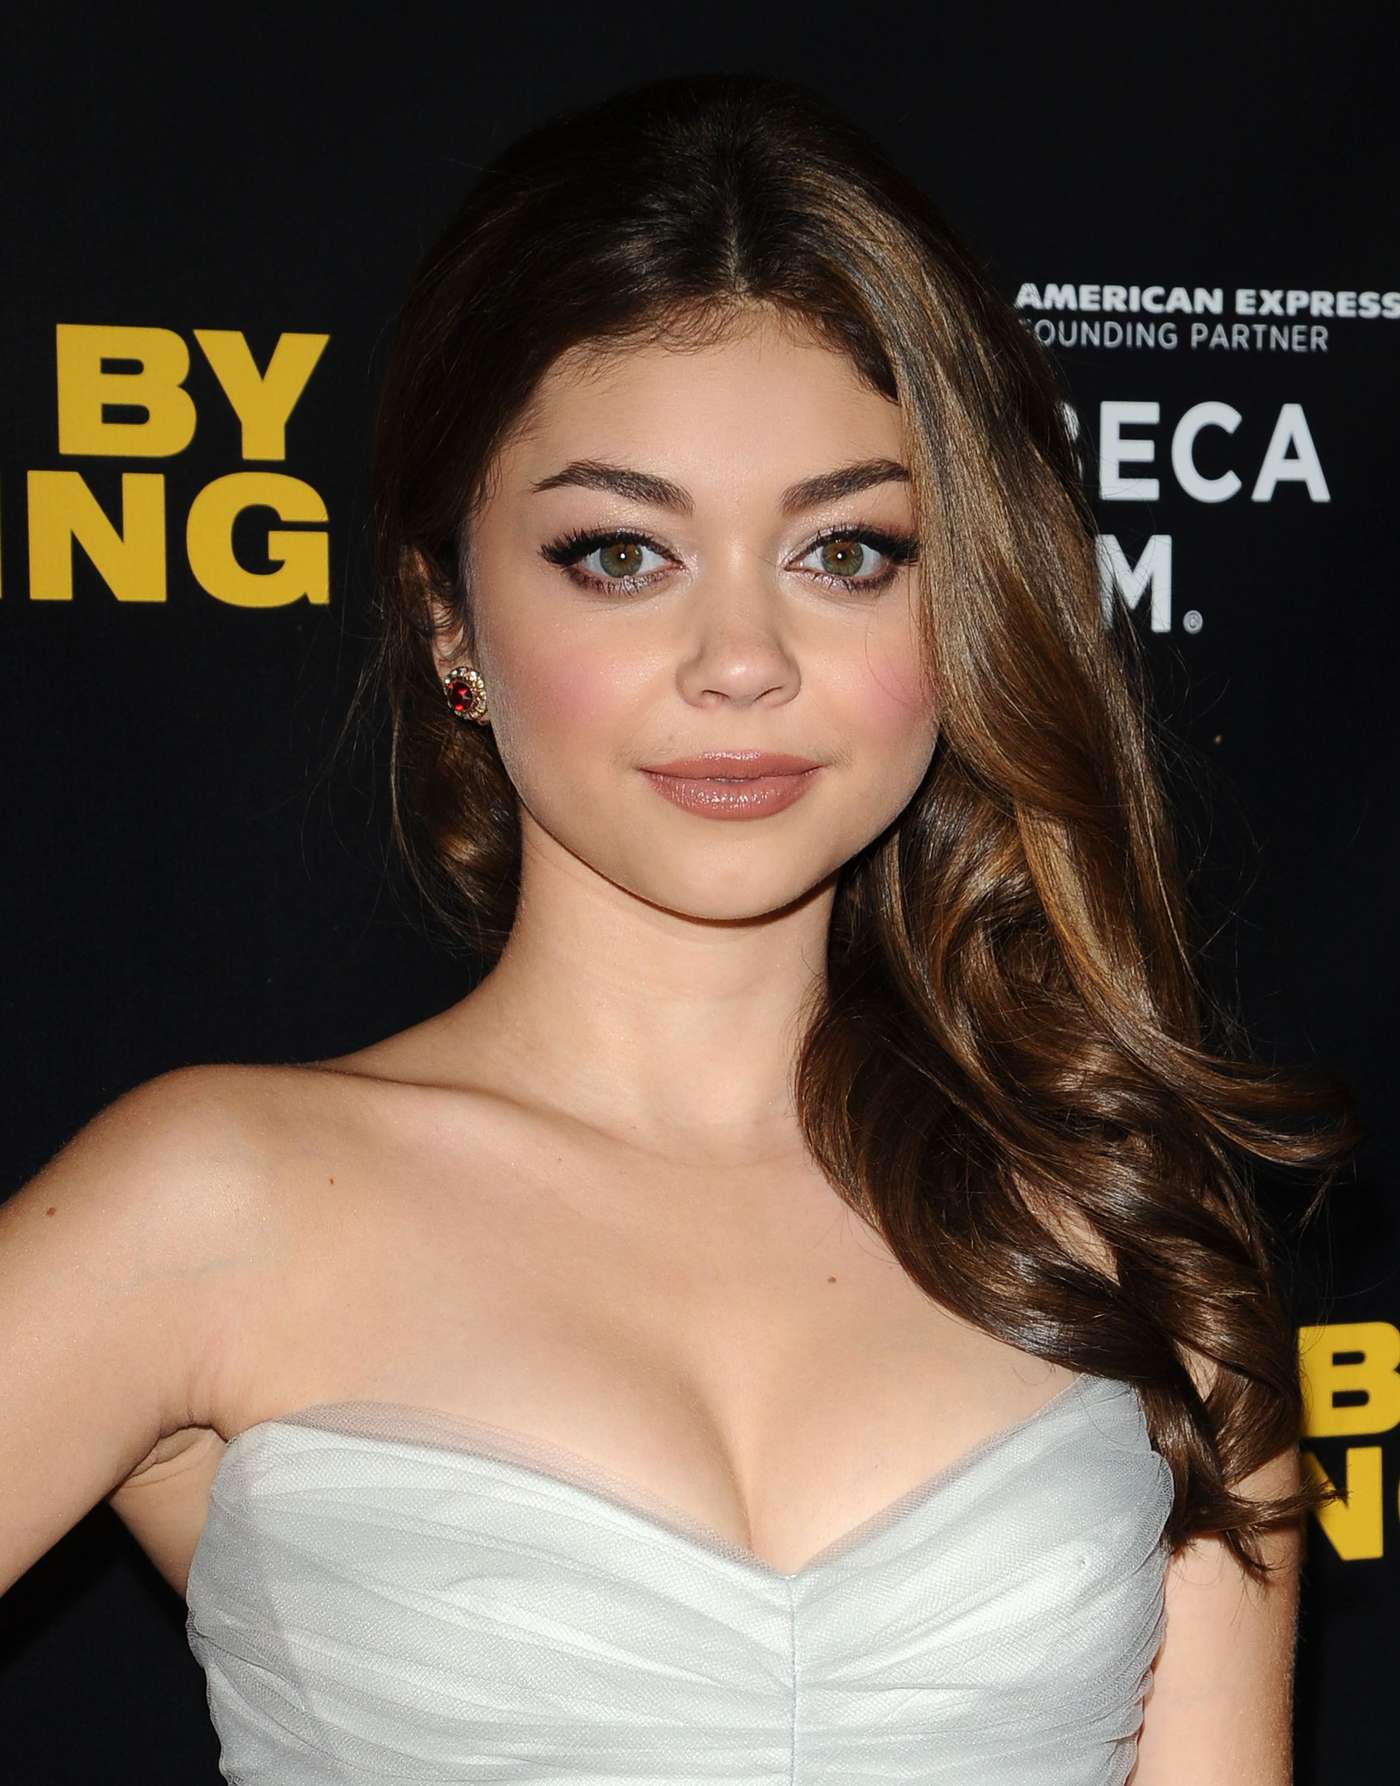 Sarah Hyland in tight dress at Struck By Lightning premiere in LA 01/06/13